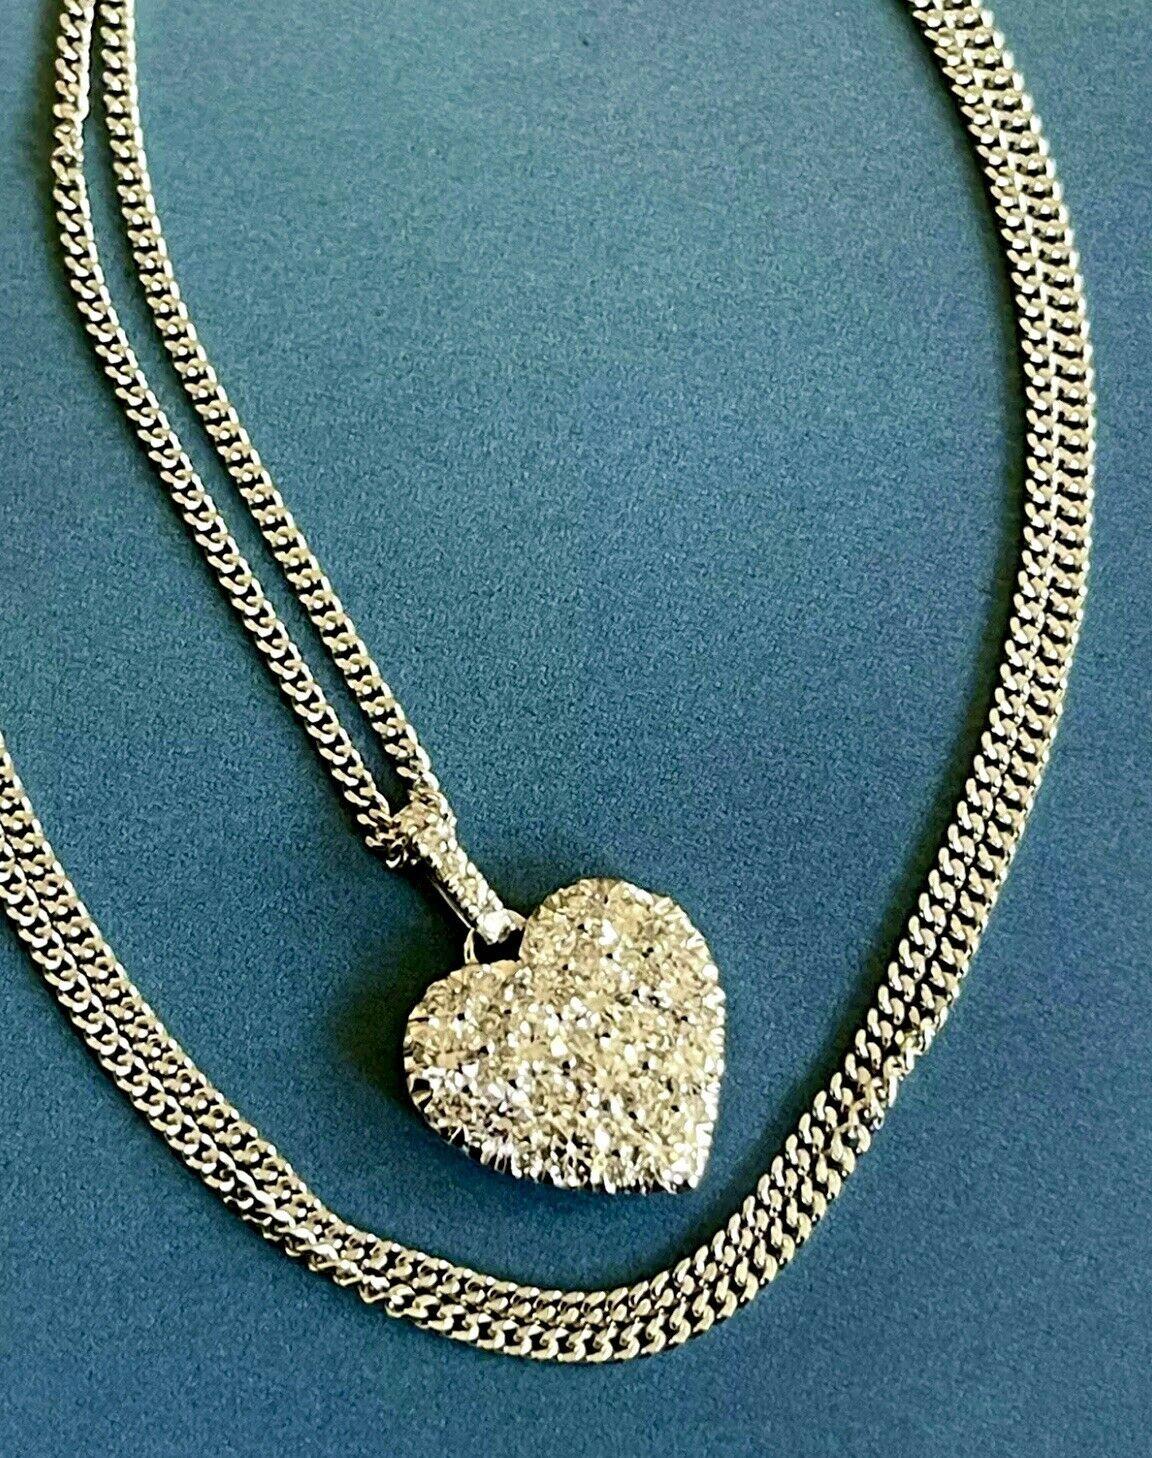 18ct White Gold Diamond Necklace 1ct Heart Pendant 18” Hallmarked VS One Carat For Sale 2